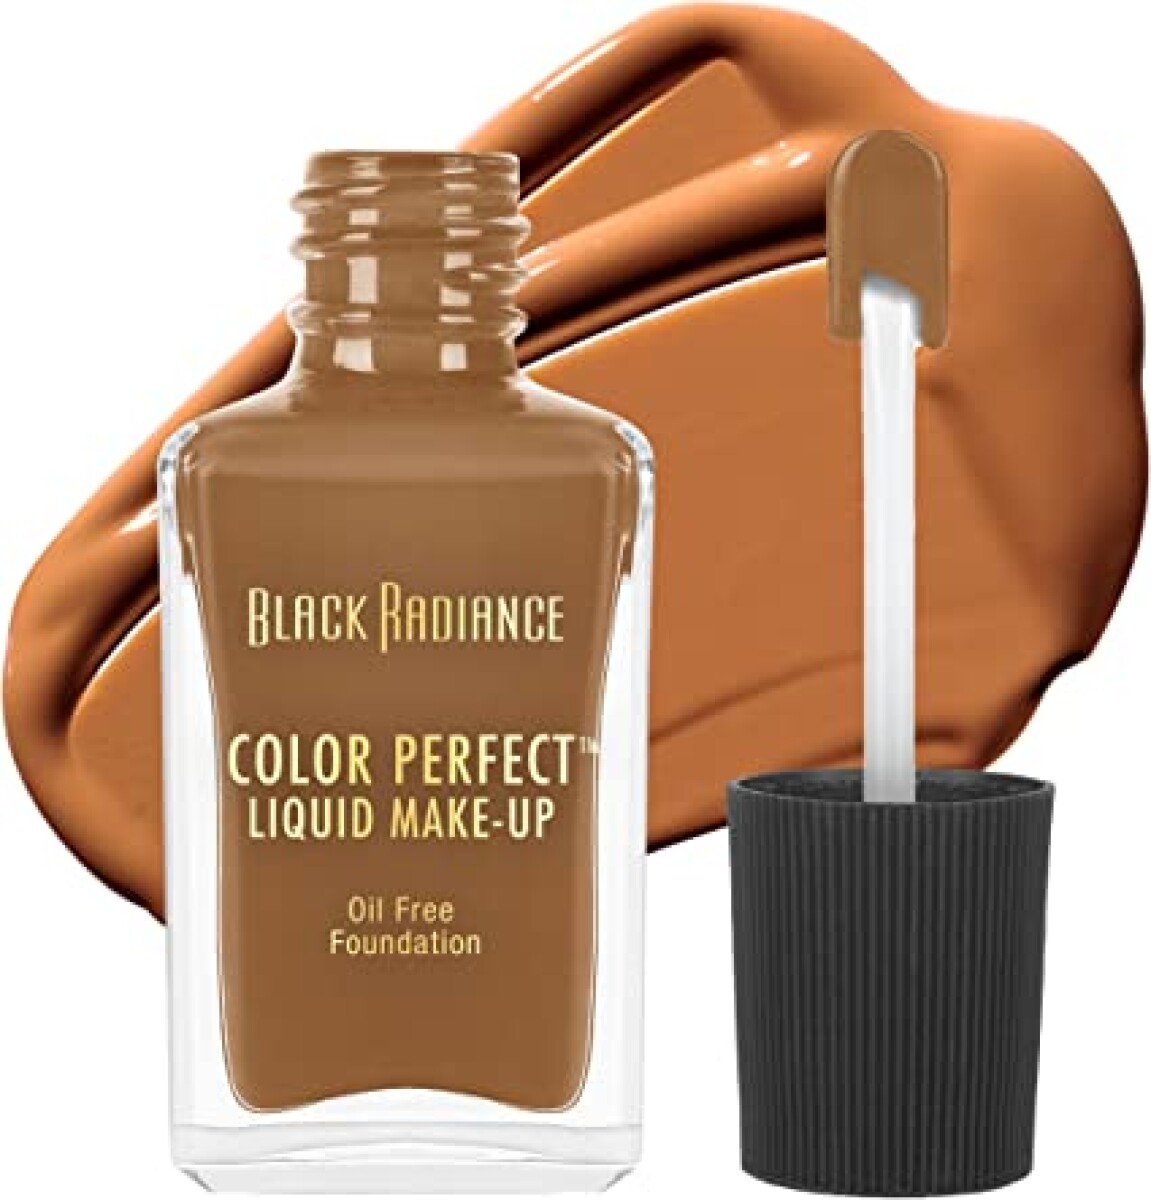 Black Radiance Color Perfect Maquillaje líquido sin aceite, 8413 Rum Spice 